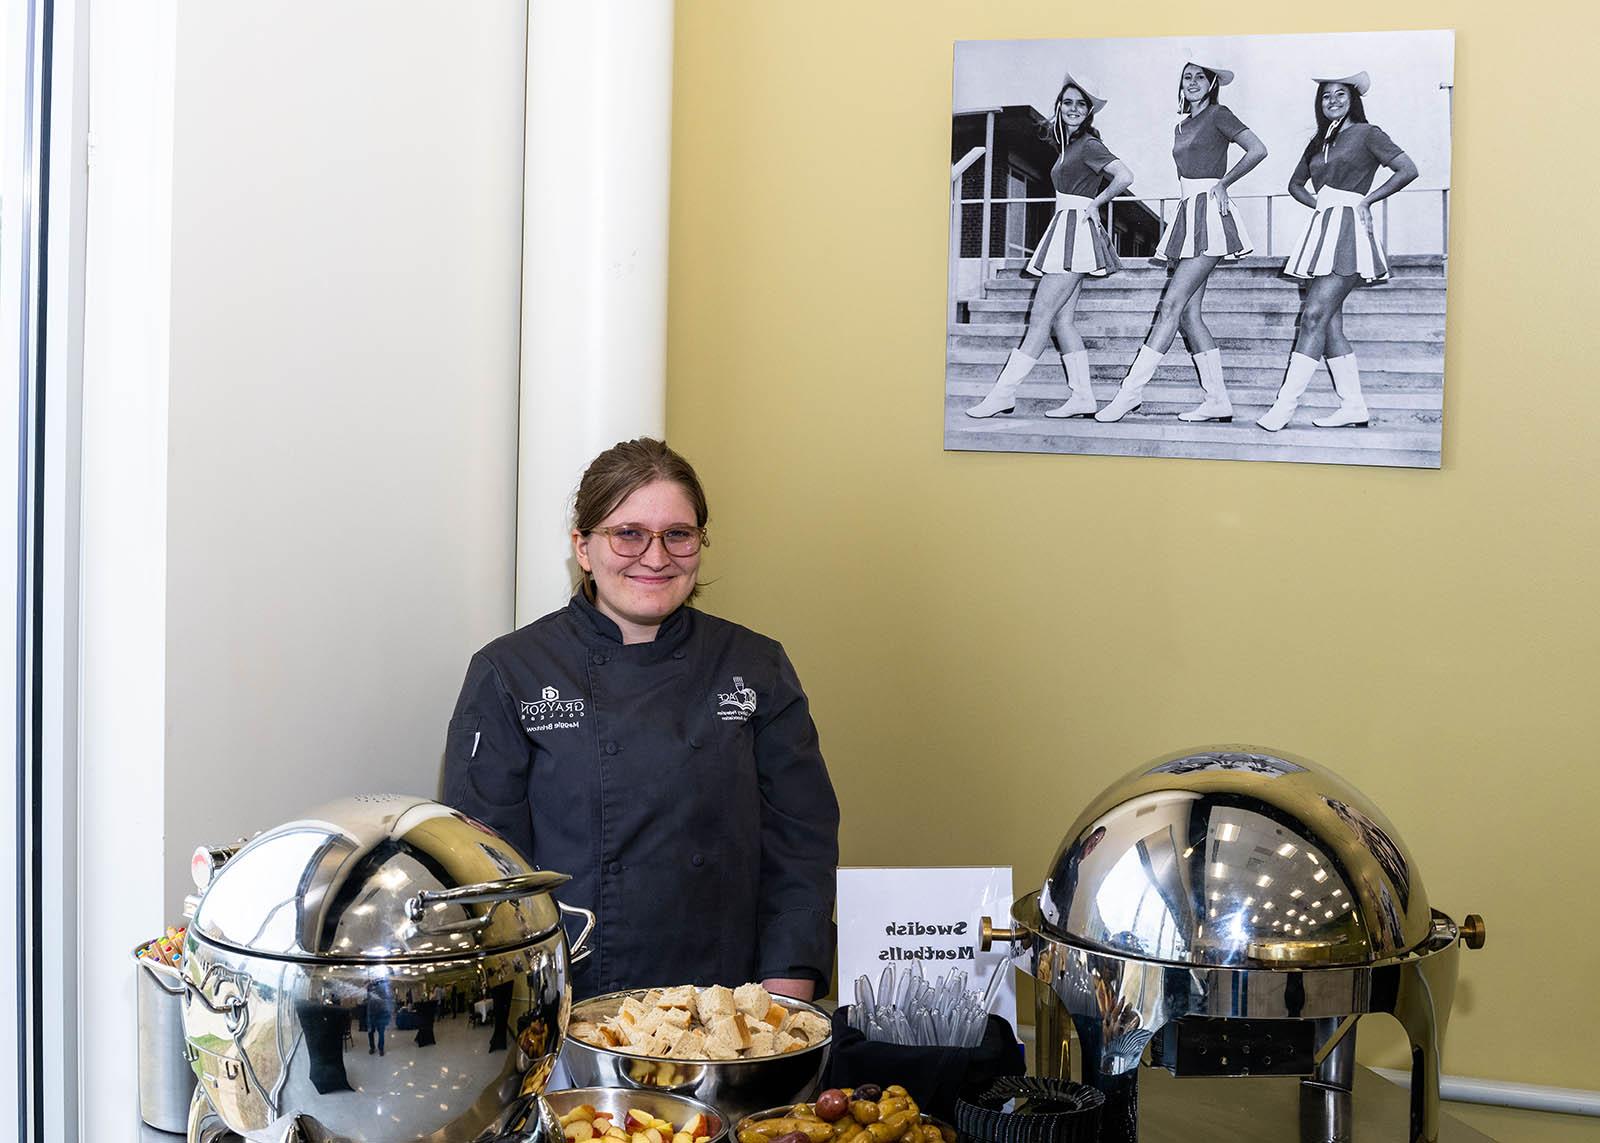 Event staff member smiling in front of Swedish Meatball serving station